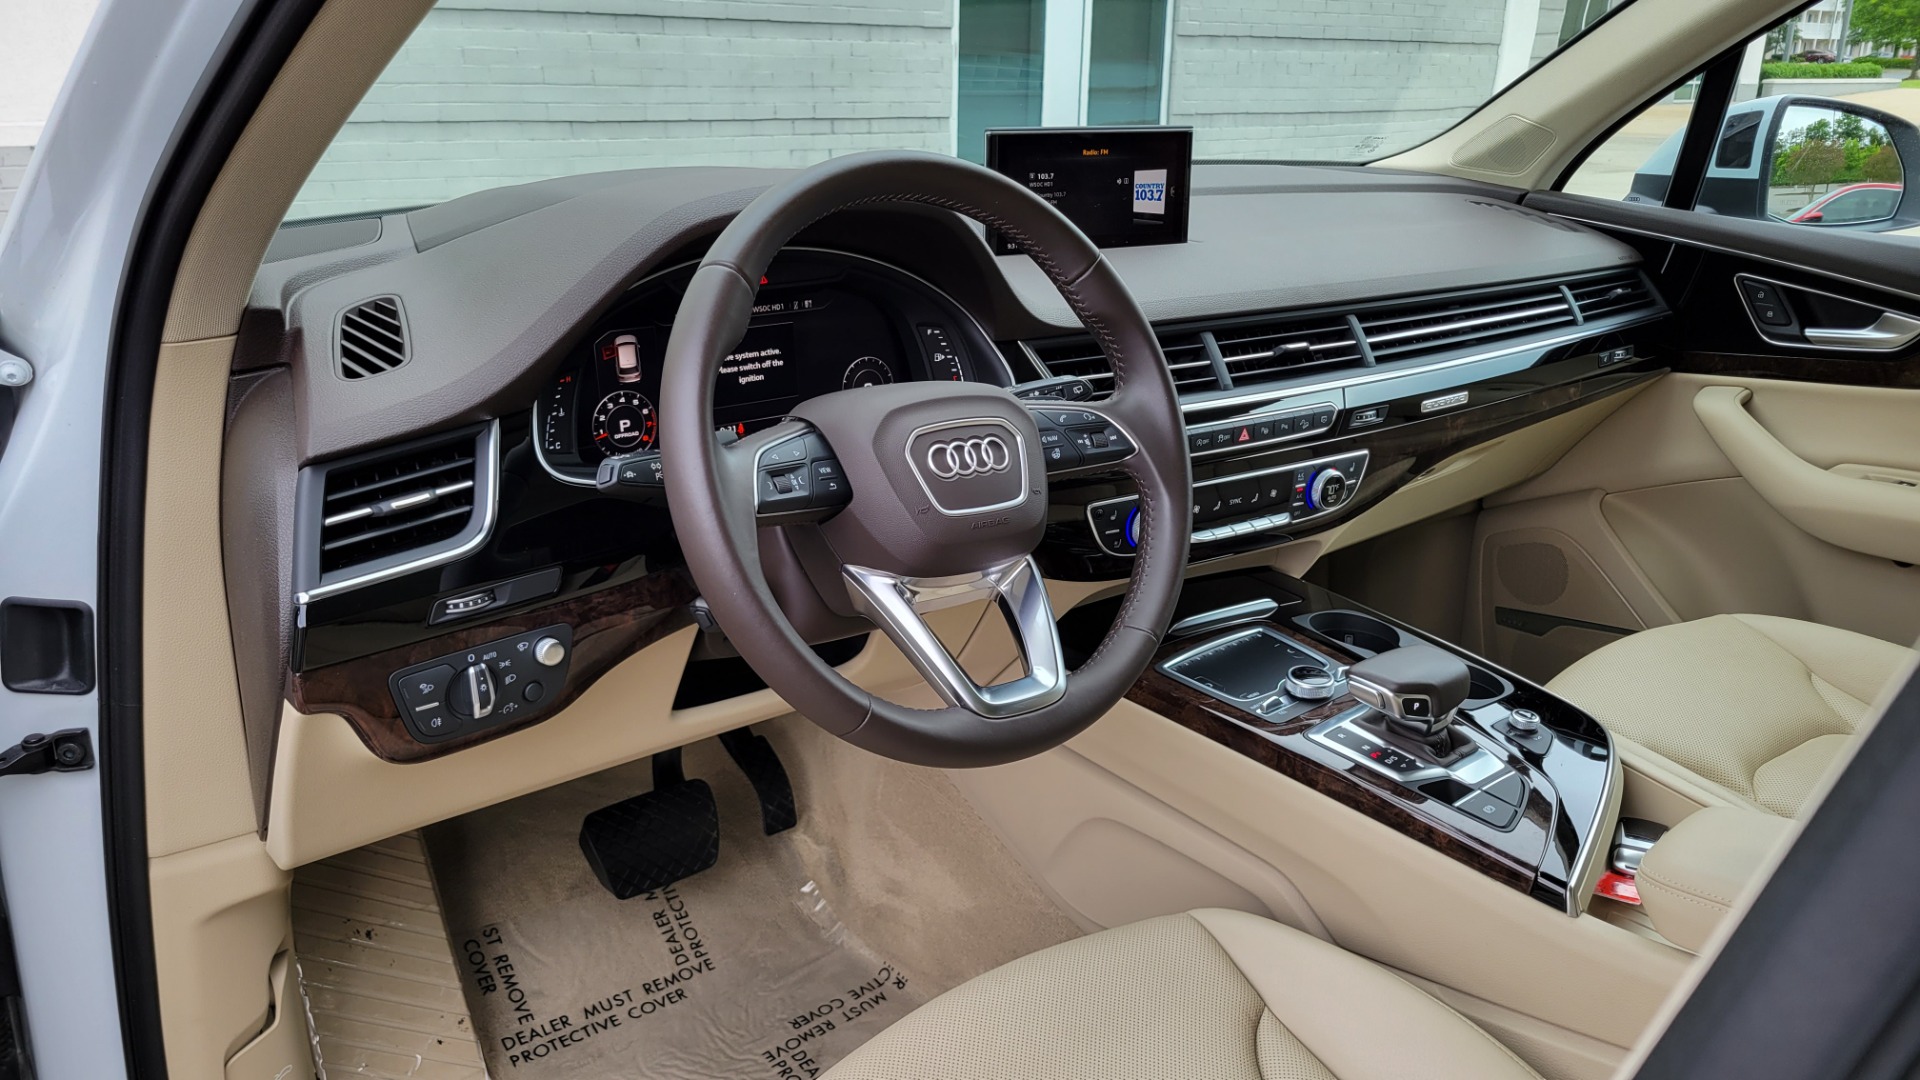 Used 2019 Audi Q7 PRESTIGE / CONV PKG / BOSE / HUD / CLD WTHR / TOWING / REARVIEW for sale $50,295 at Formula Imports in Charlotte NC 28227 46